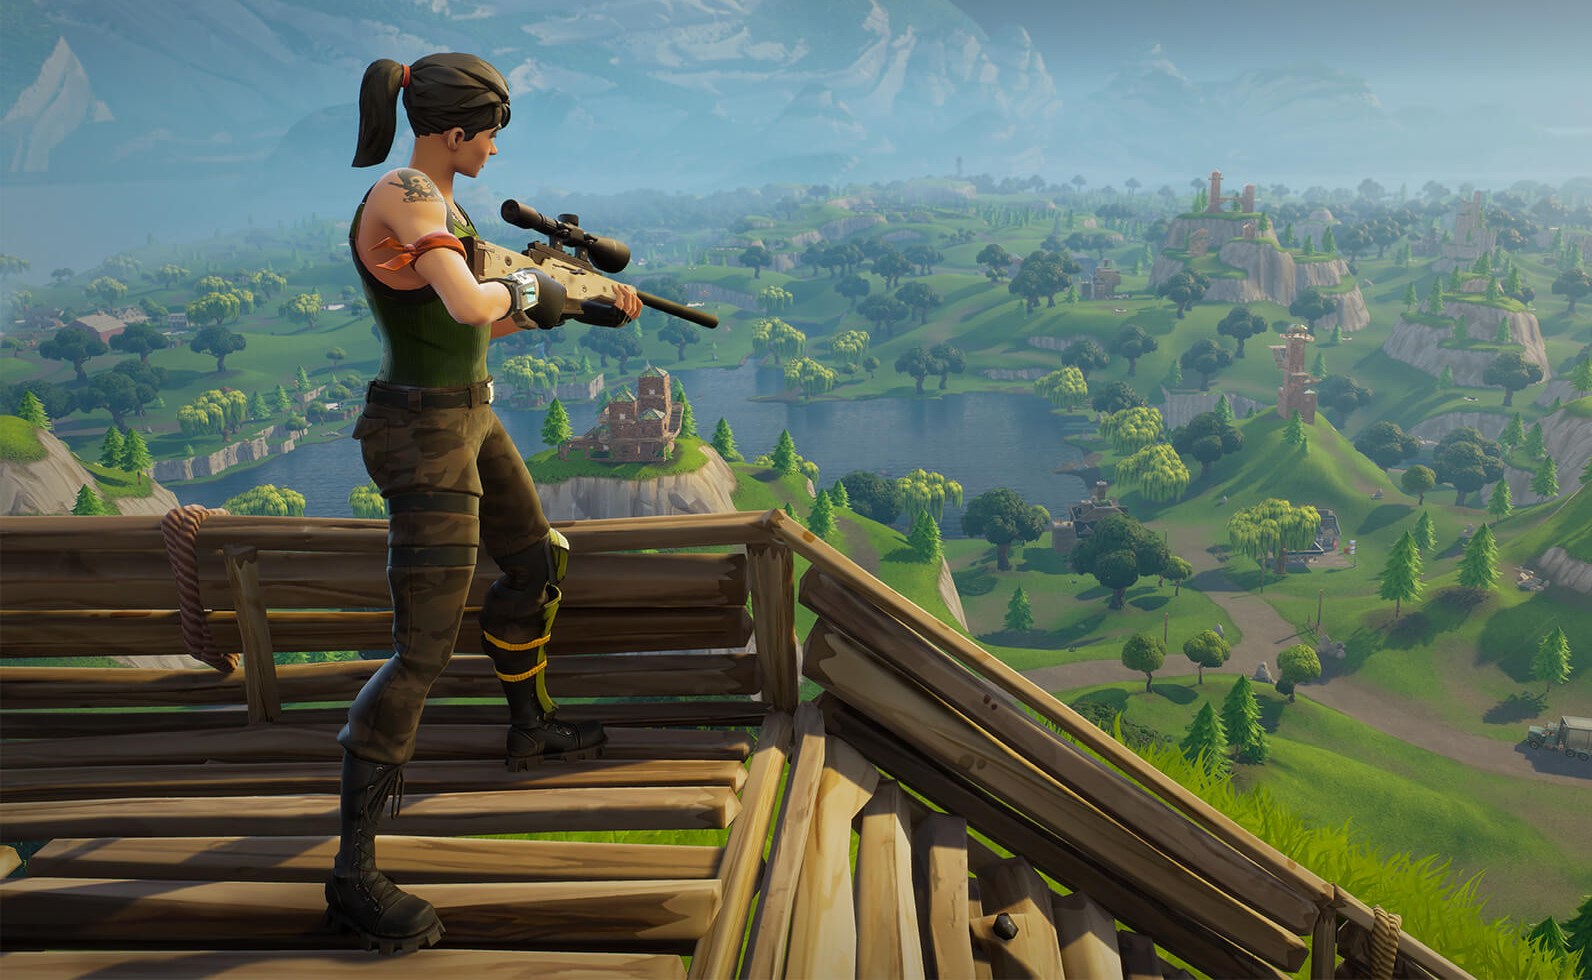 Mother of 14-year-old sued by Fortnite developer claims son is ‘scapegoat’